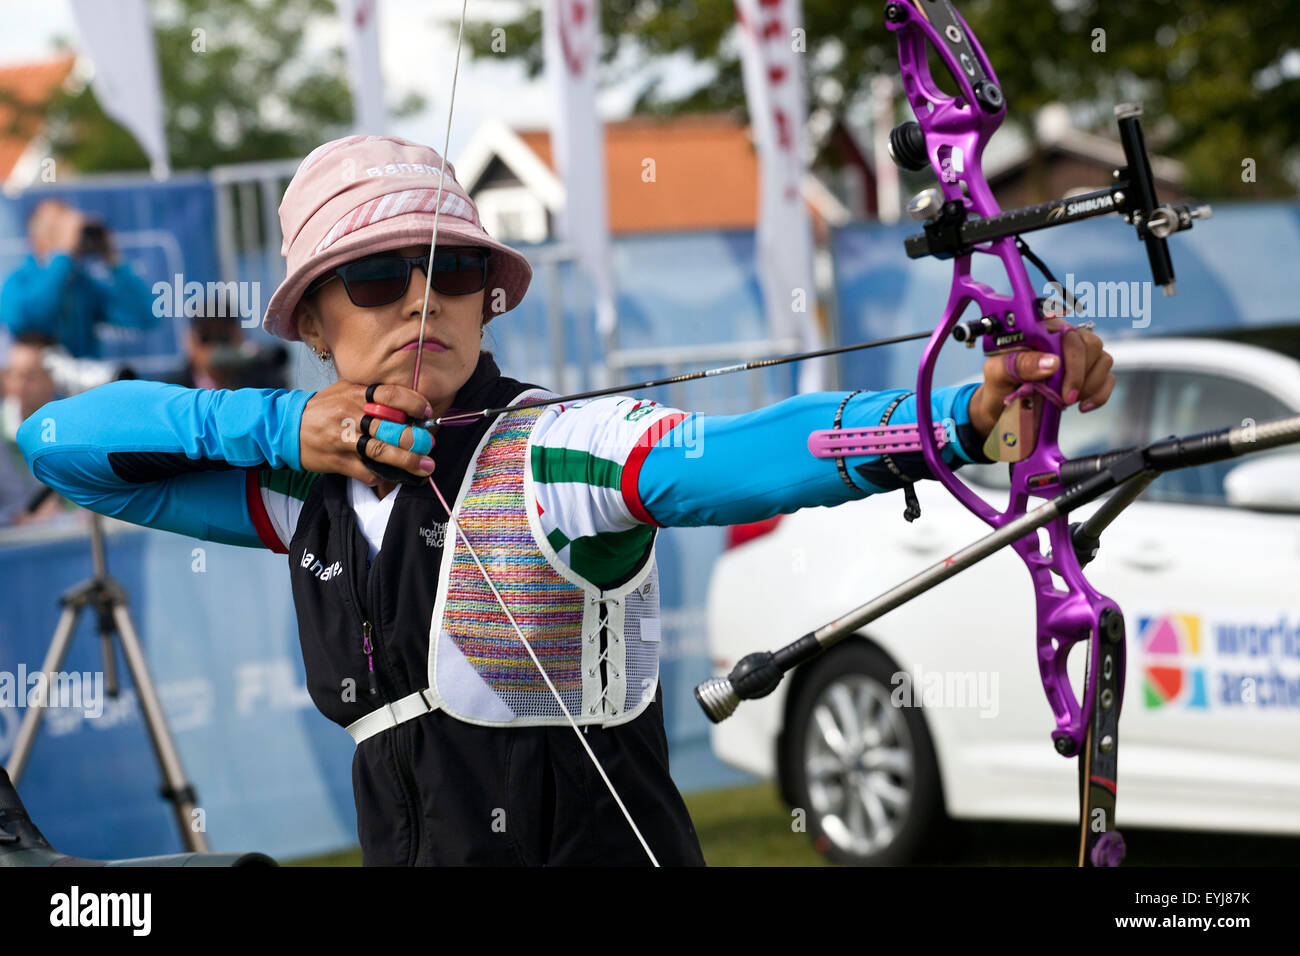 Copenhagen, Denmark, July 30th, 2015: Mexican archer Aida Roman competes in the World Archery Championships in Copenhagen during Thursday's individual matches  in recurve bow. Credit:  OJPHOTOS/Alamy Live News Stock Photo